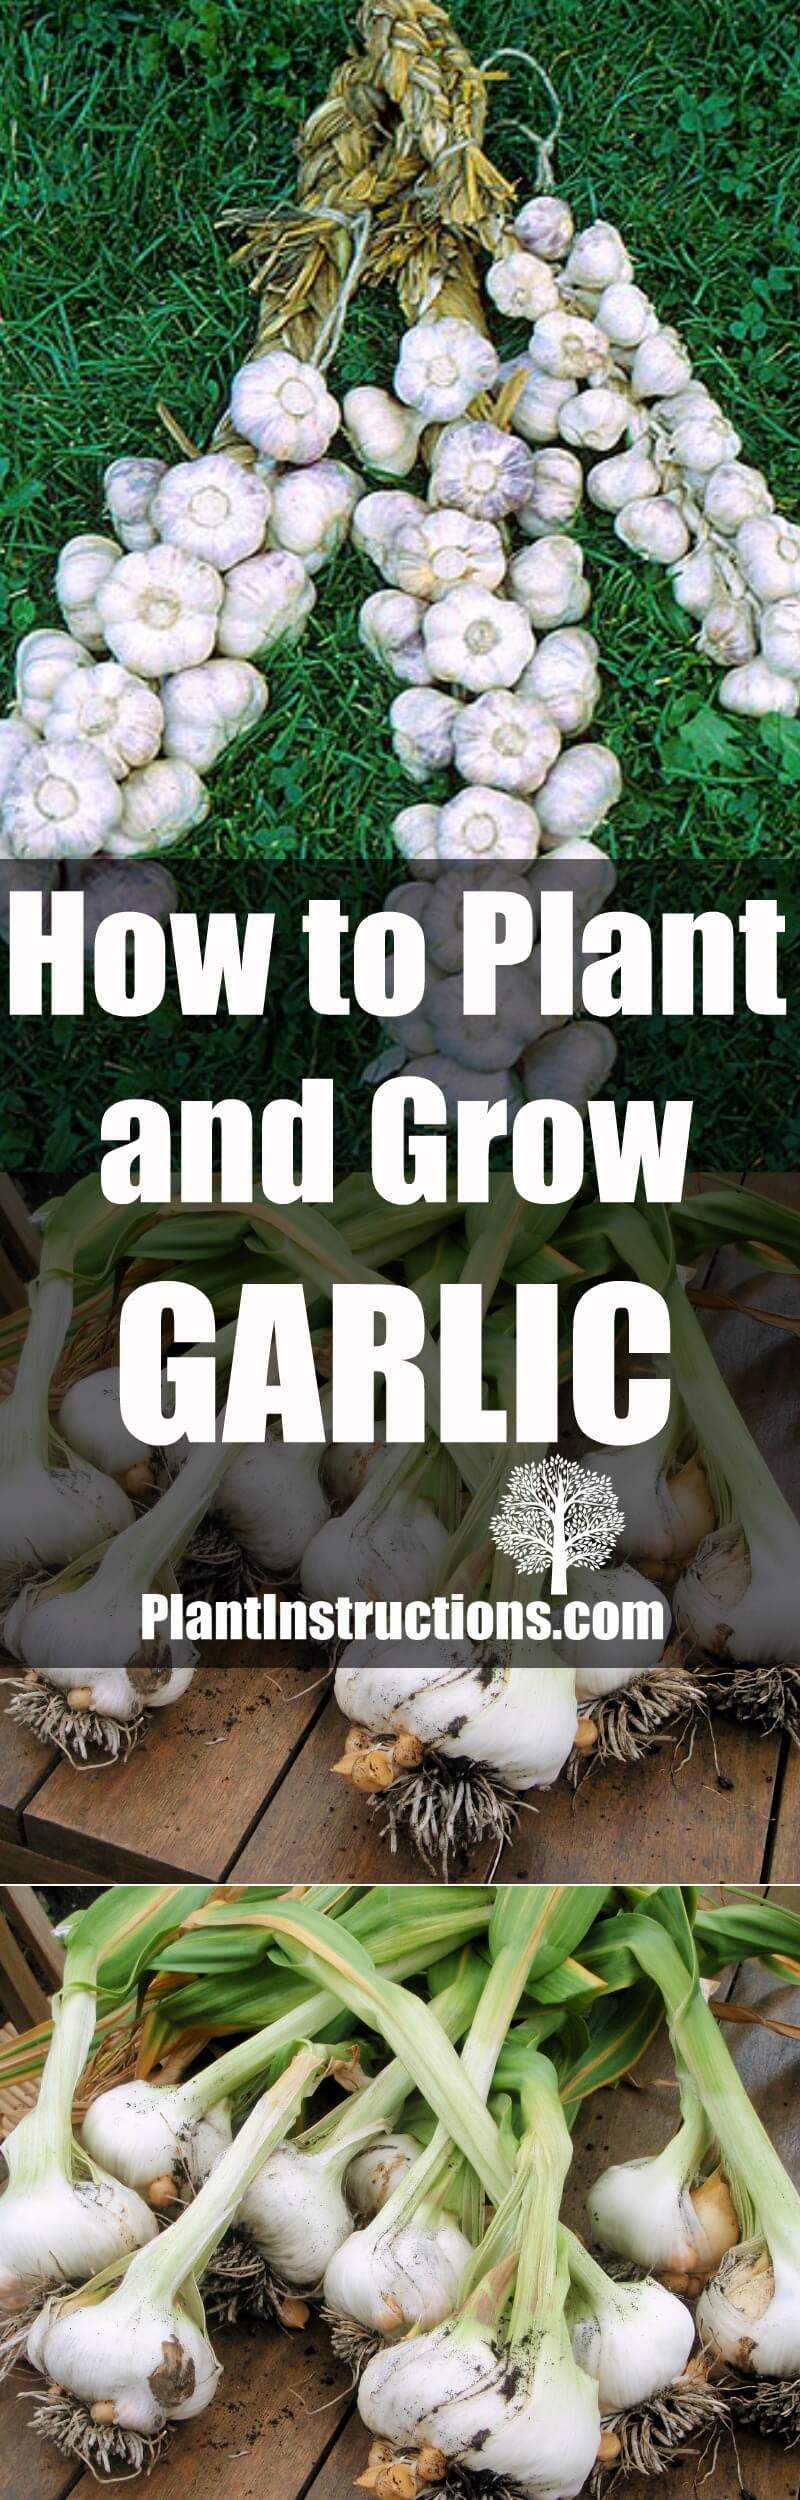 How to Plant and Grow Garlic - Plant Instructions